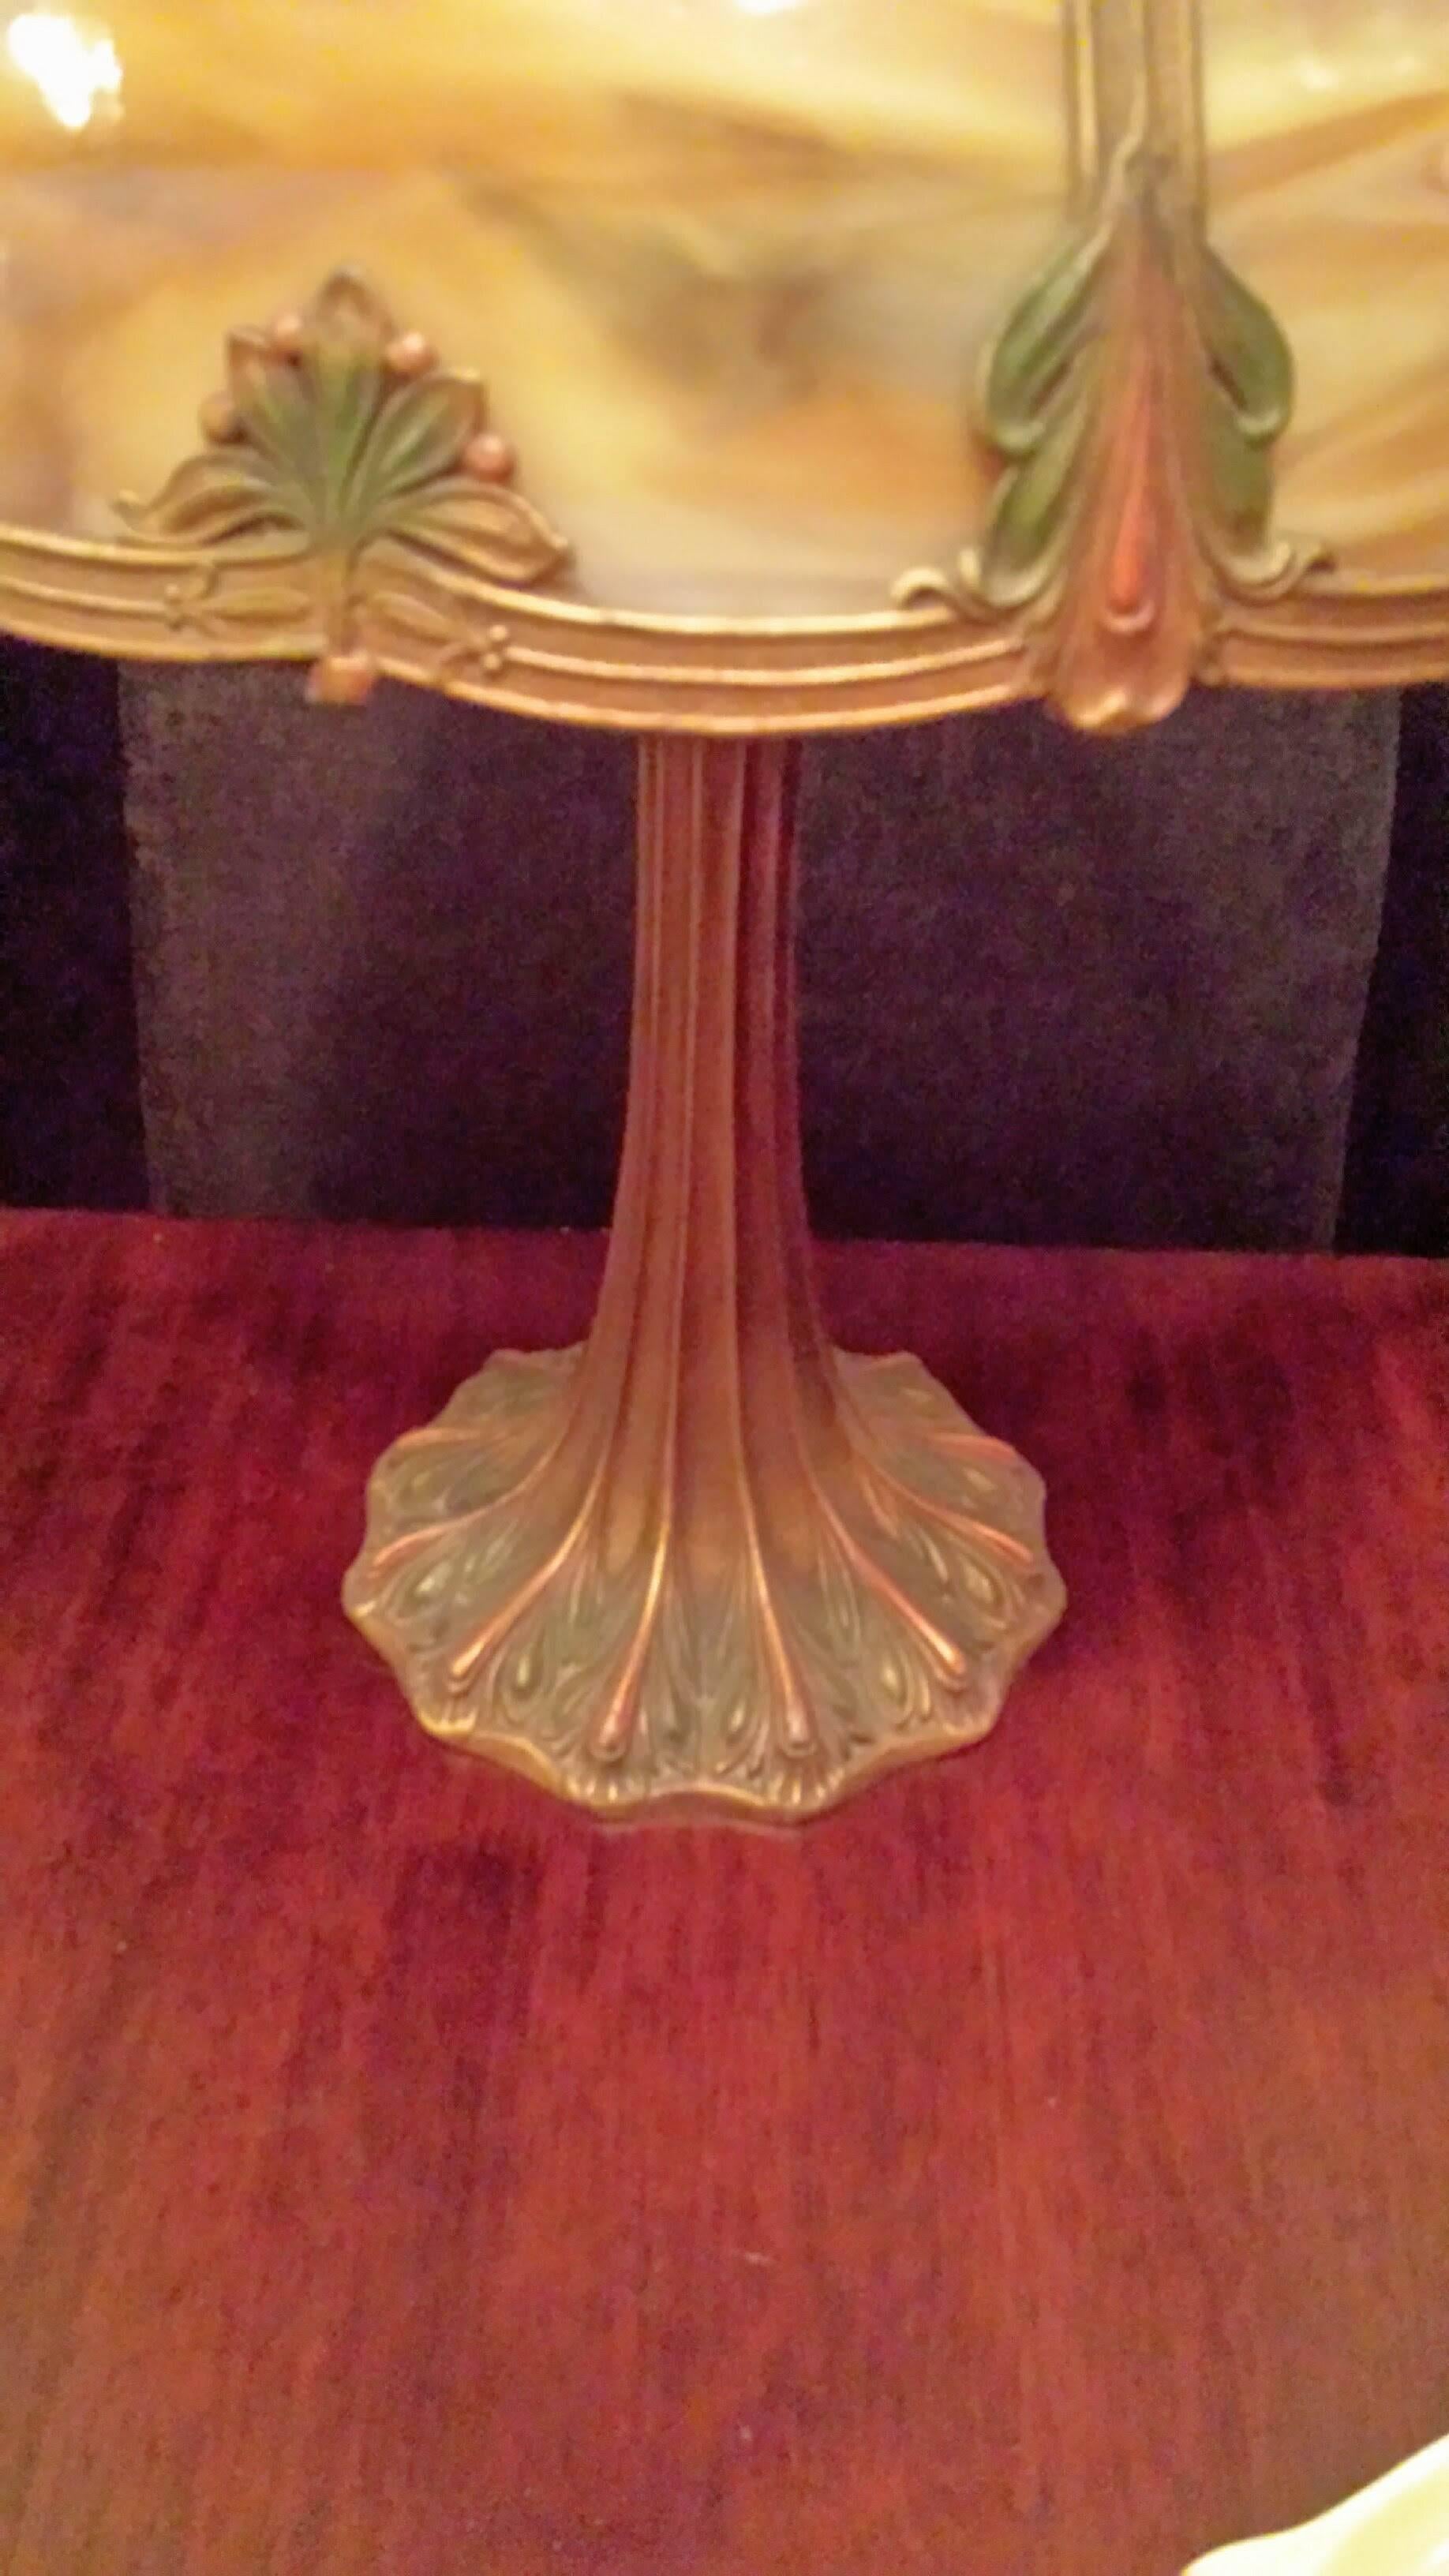 Slag Glass Table Lamp, Carmel Colored Glass with A Leaf Decorated Shade & Base, in Original Bronze/Green & Copper Tone. The lamp has original old glass on all panels, with original finial. The lamp has a newer replaced electrical cord, but with